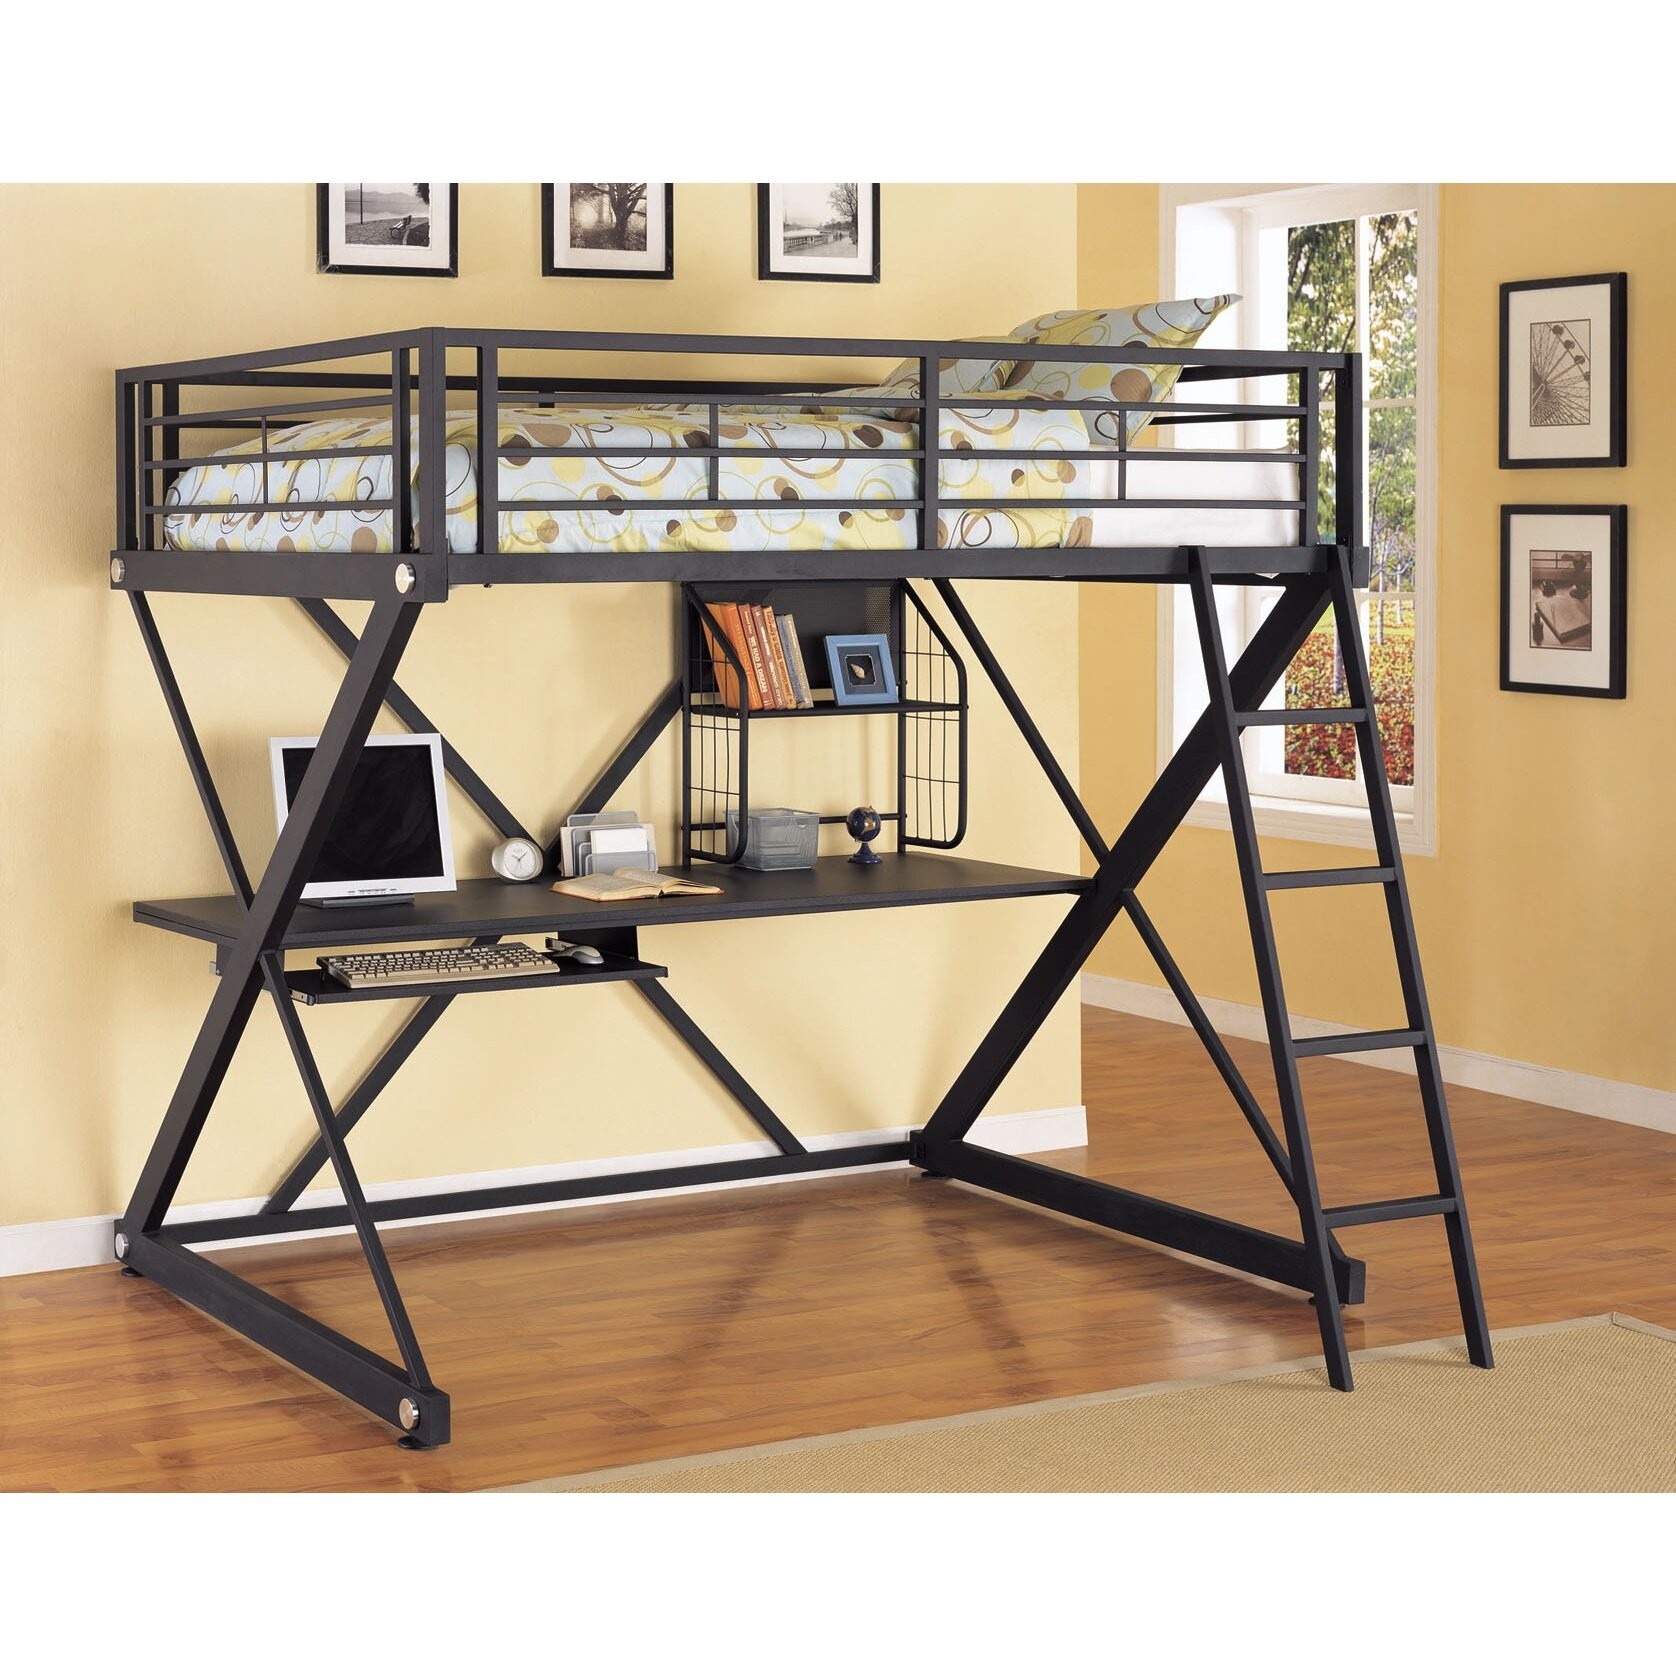 Childrens Full Bunk Bed with Storage